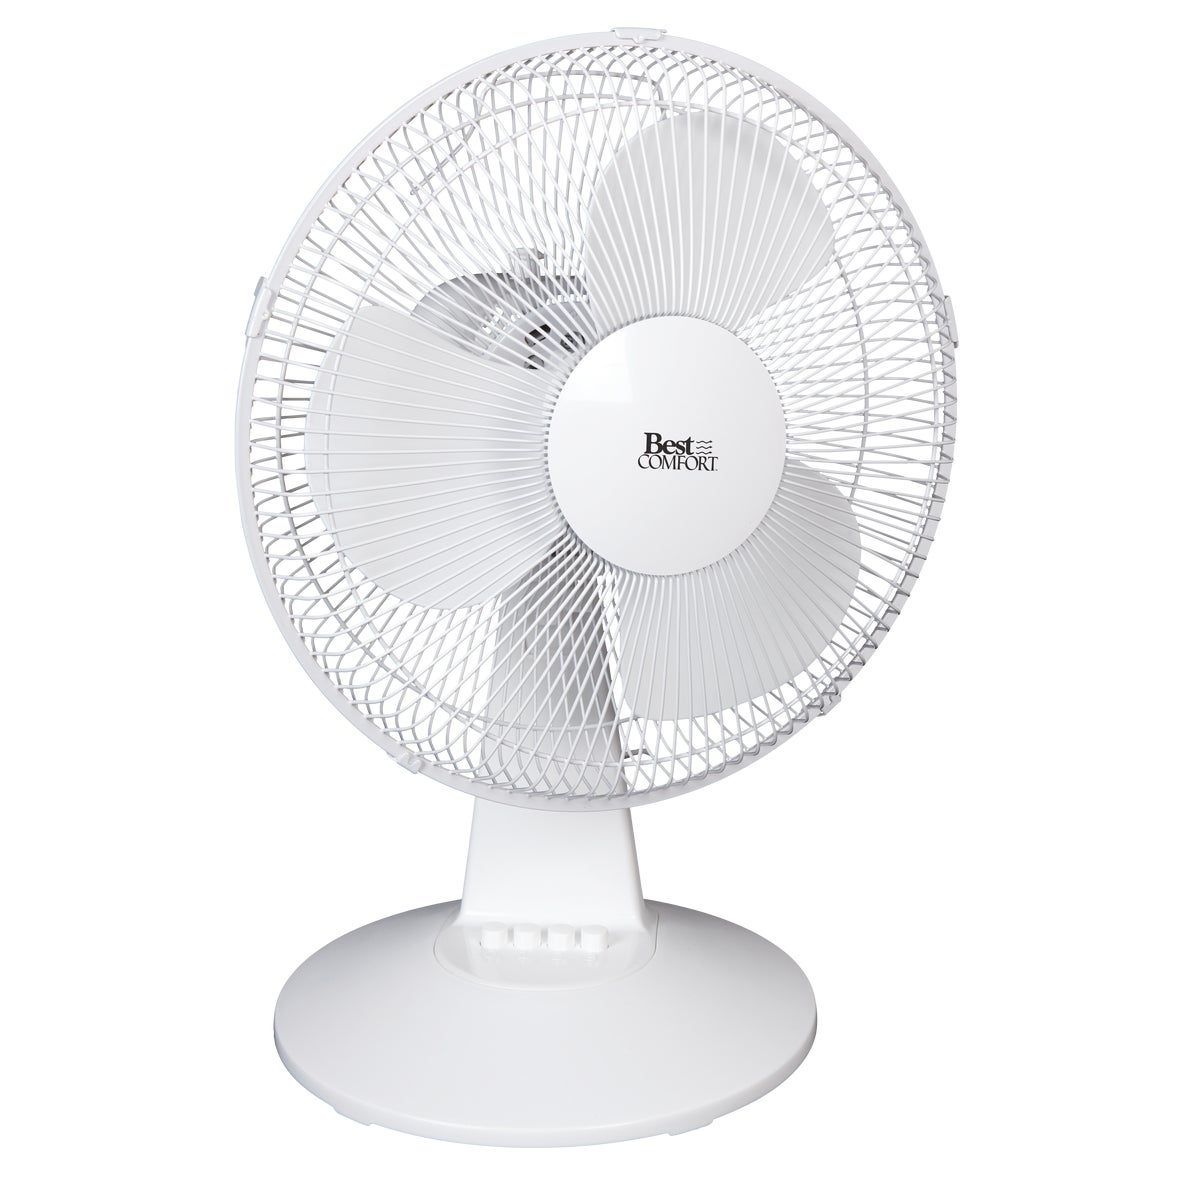 Item 544825, 3-speed, oscillating fan with push-button controls.